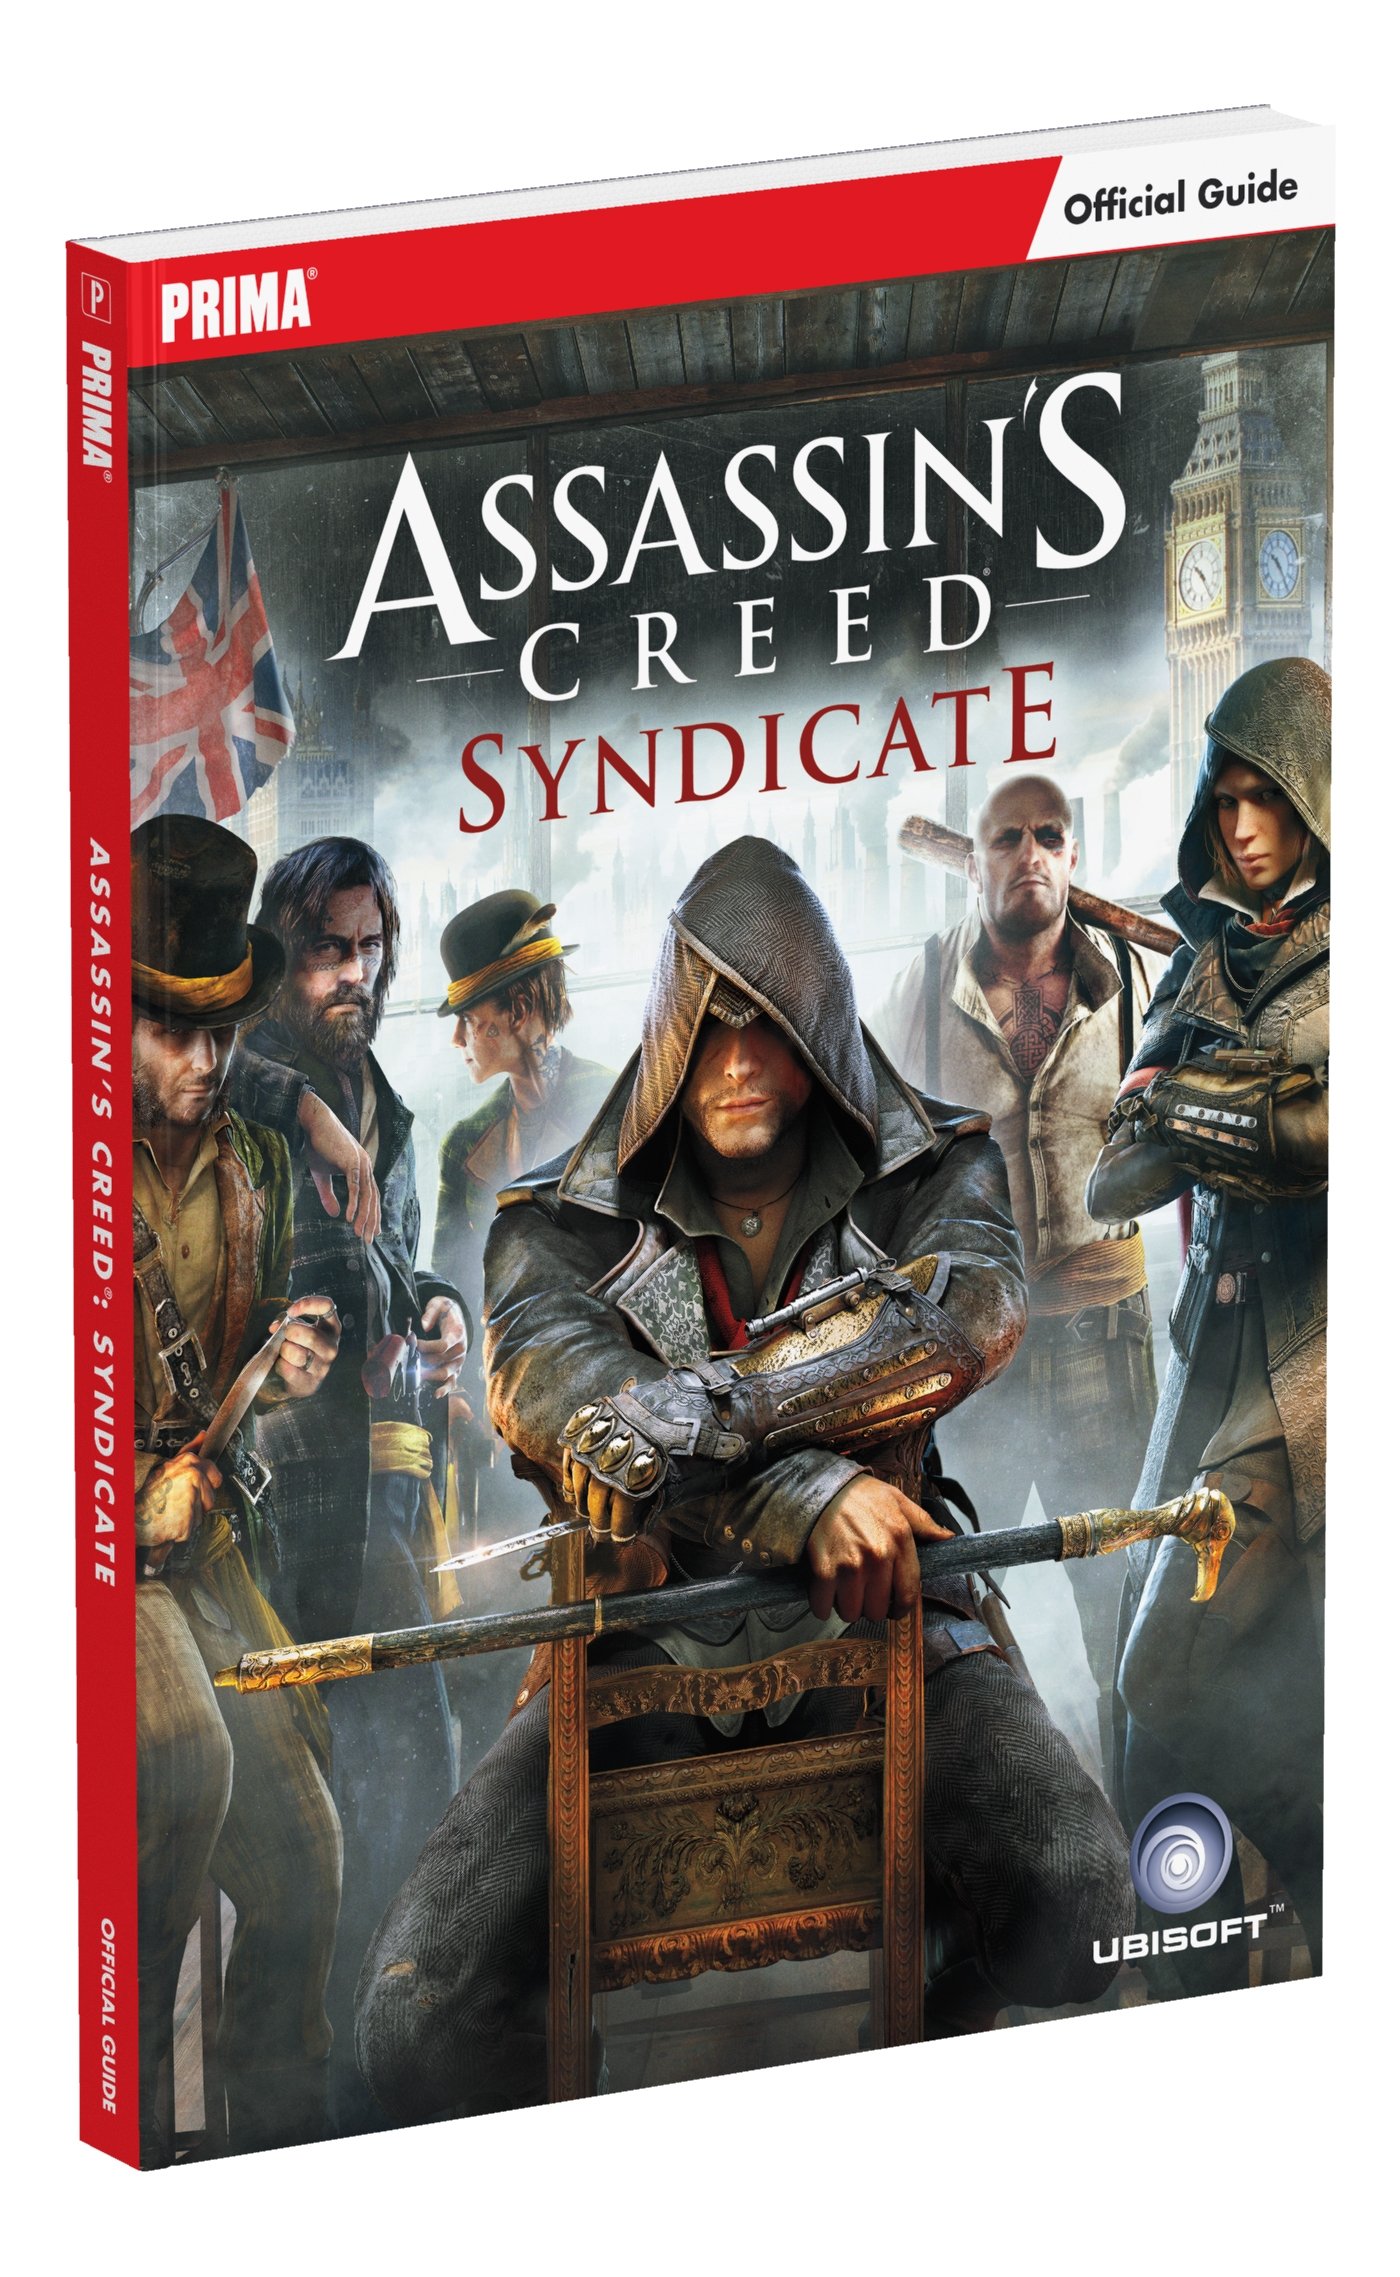 Assassin's Creed - Chronicle, PDF